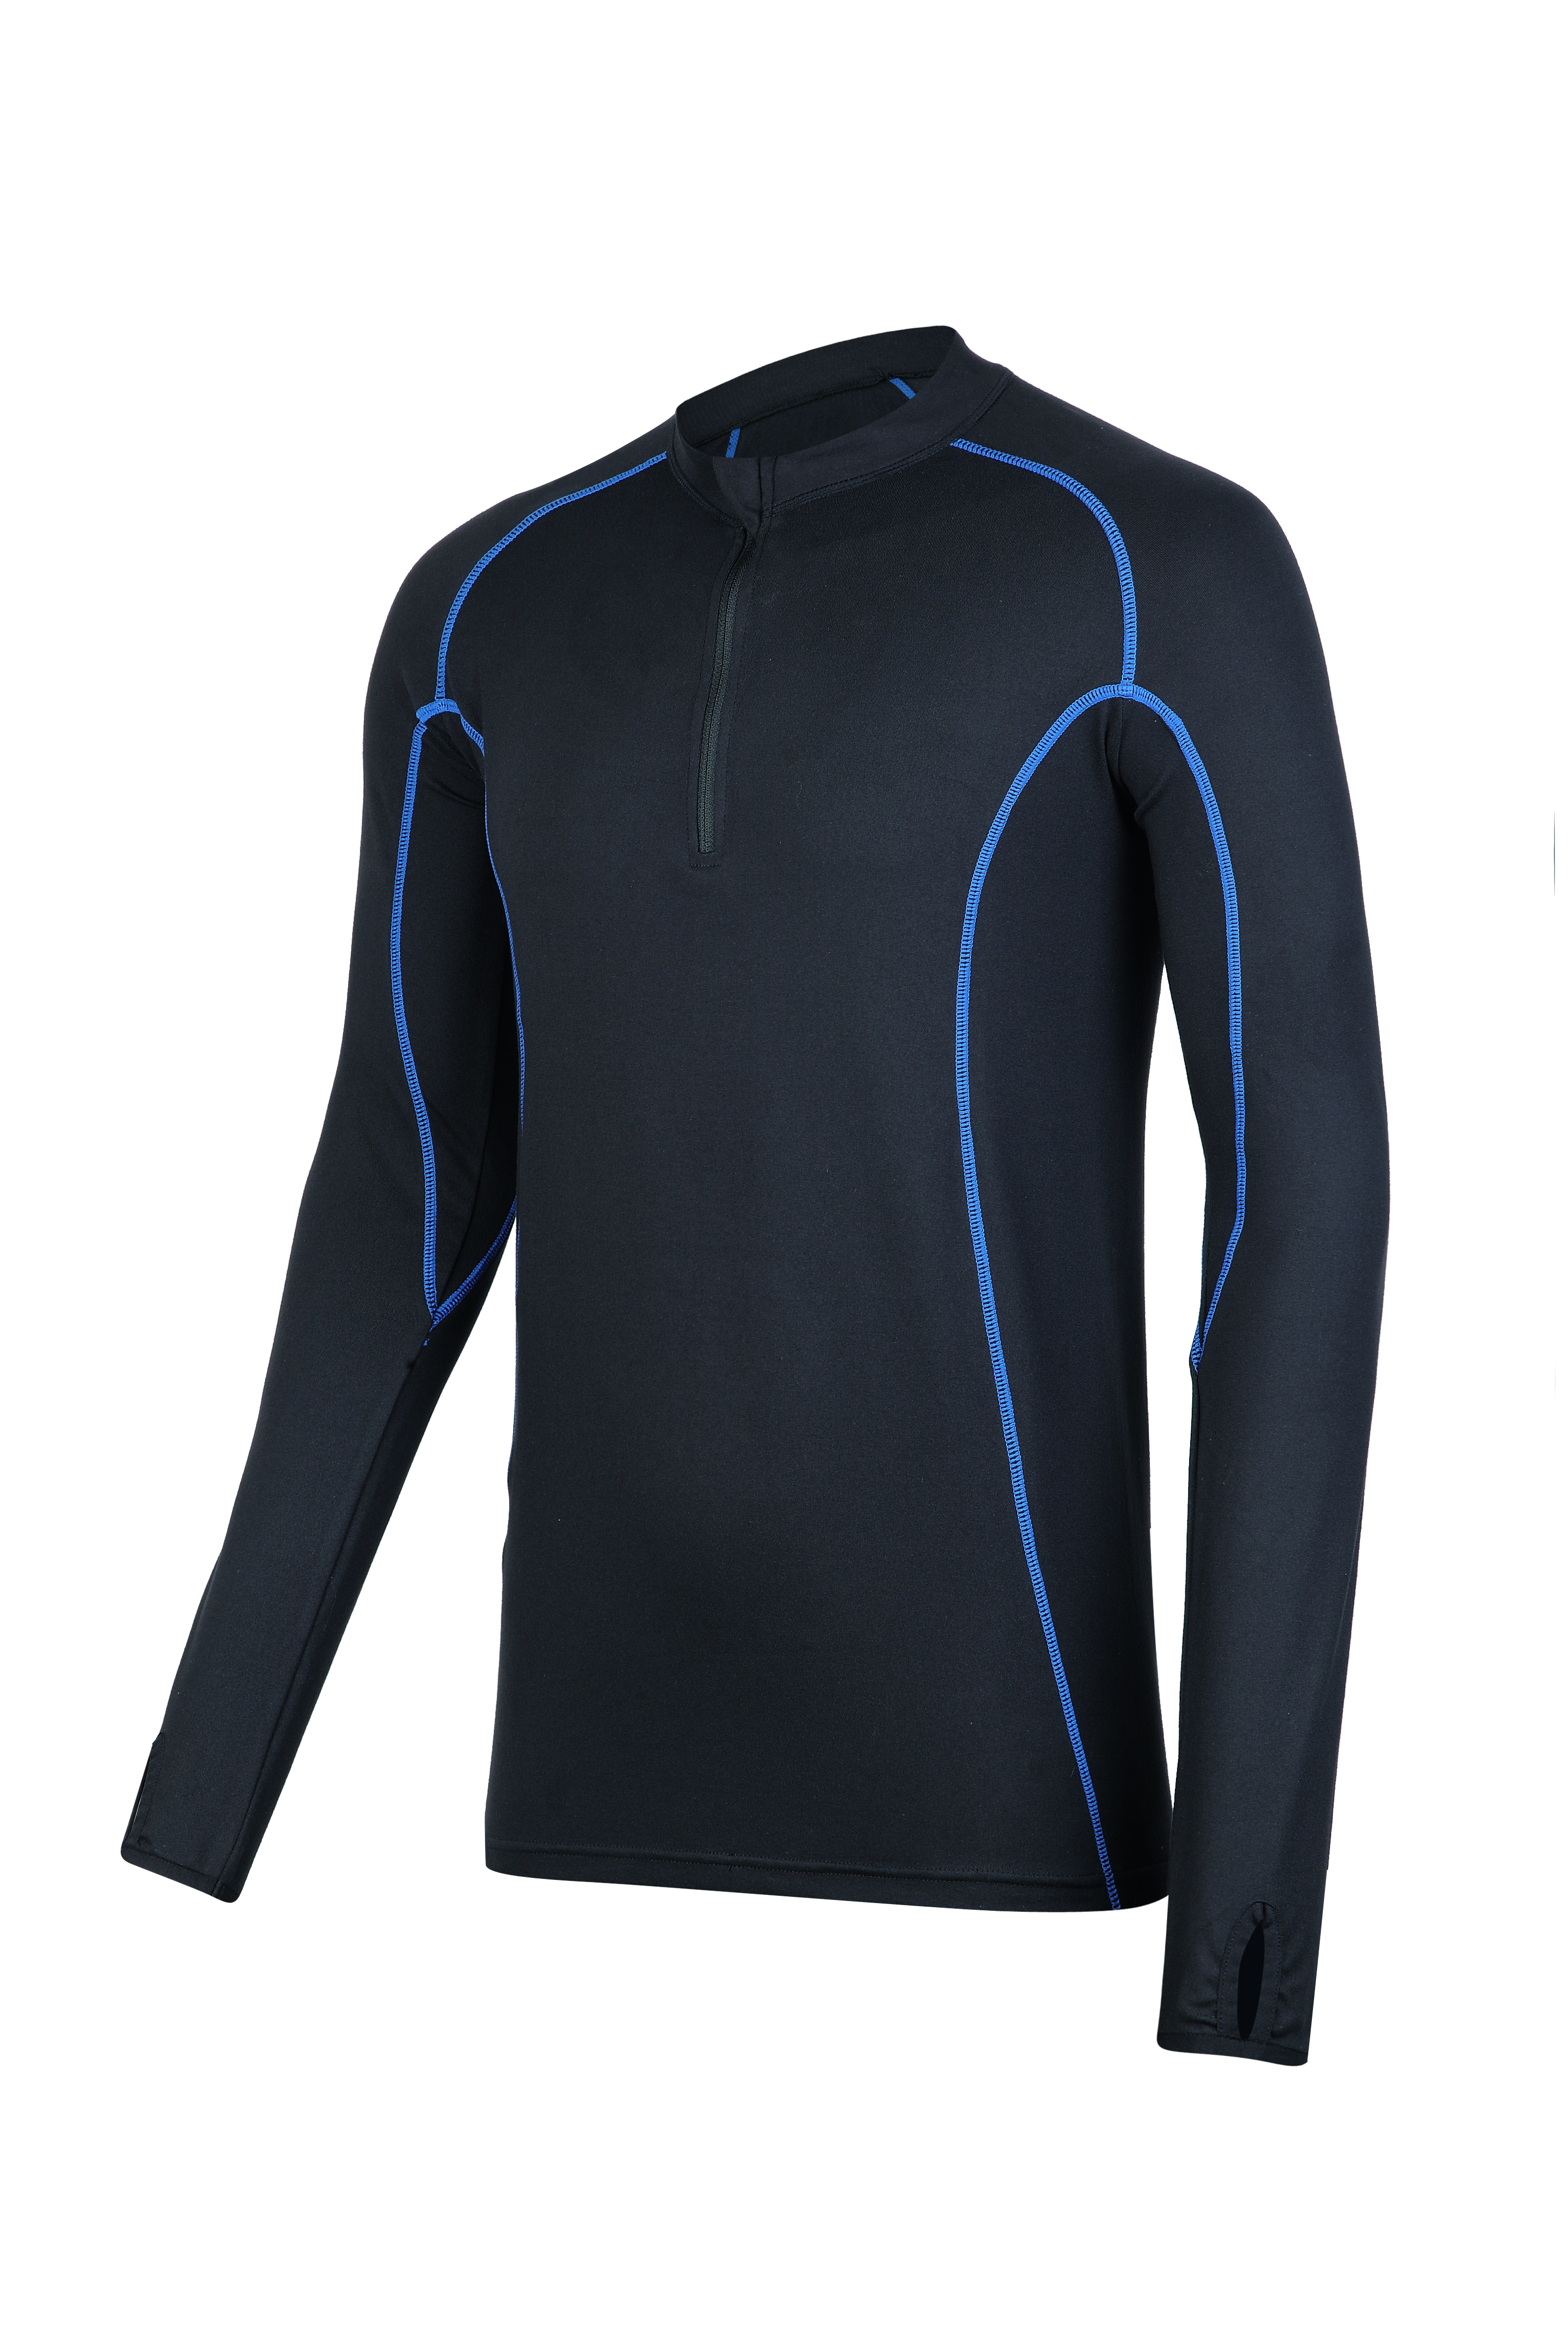 Men’s knitted 1/4 zipper compression top.